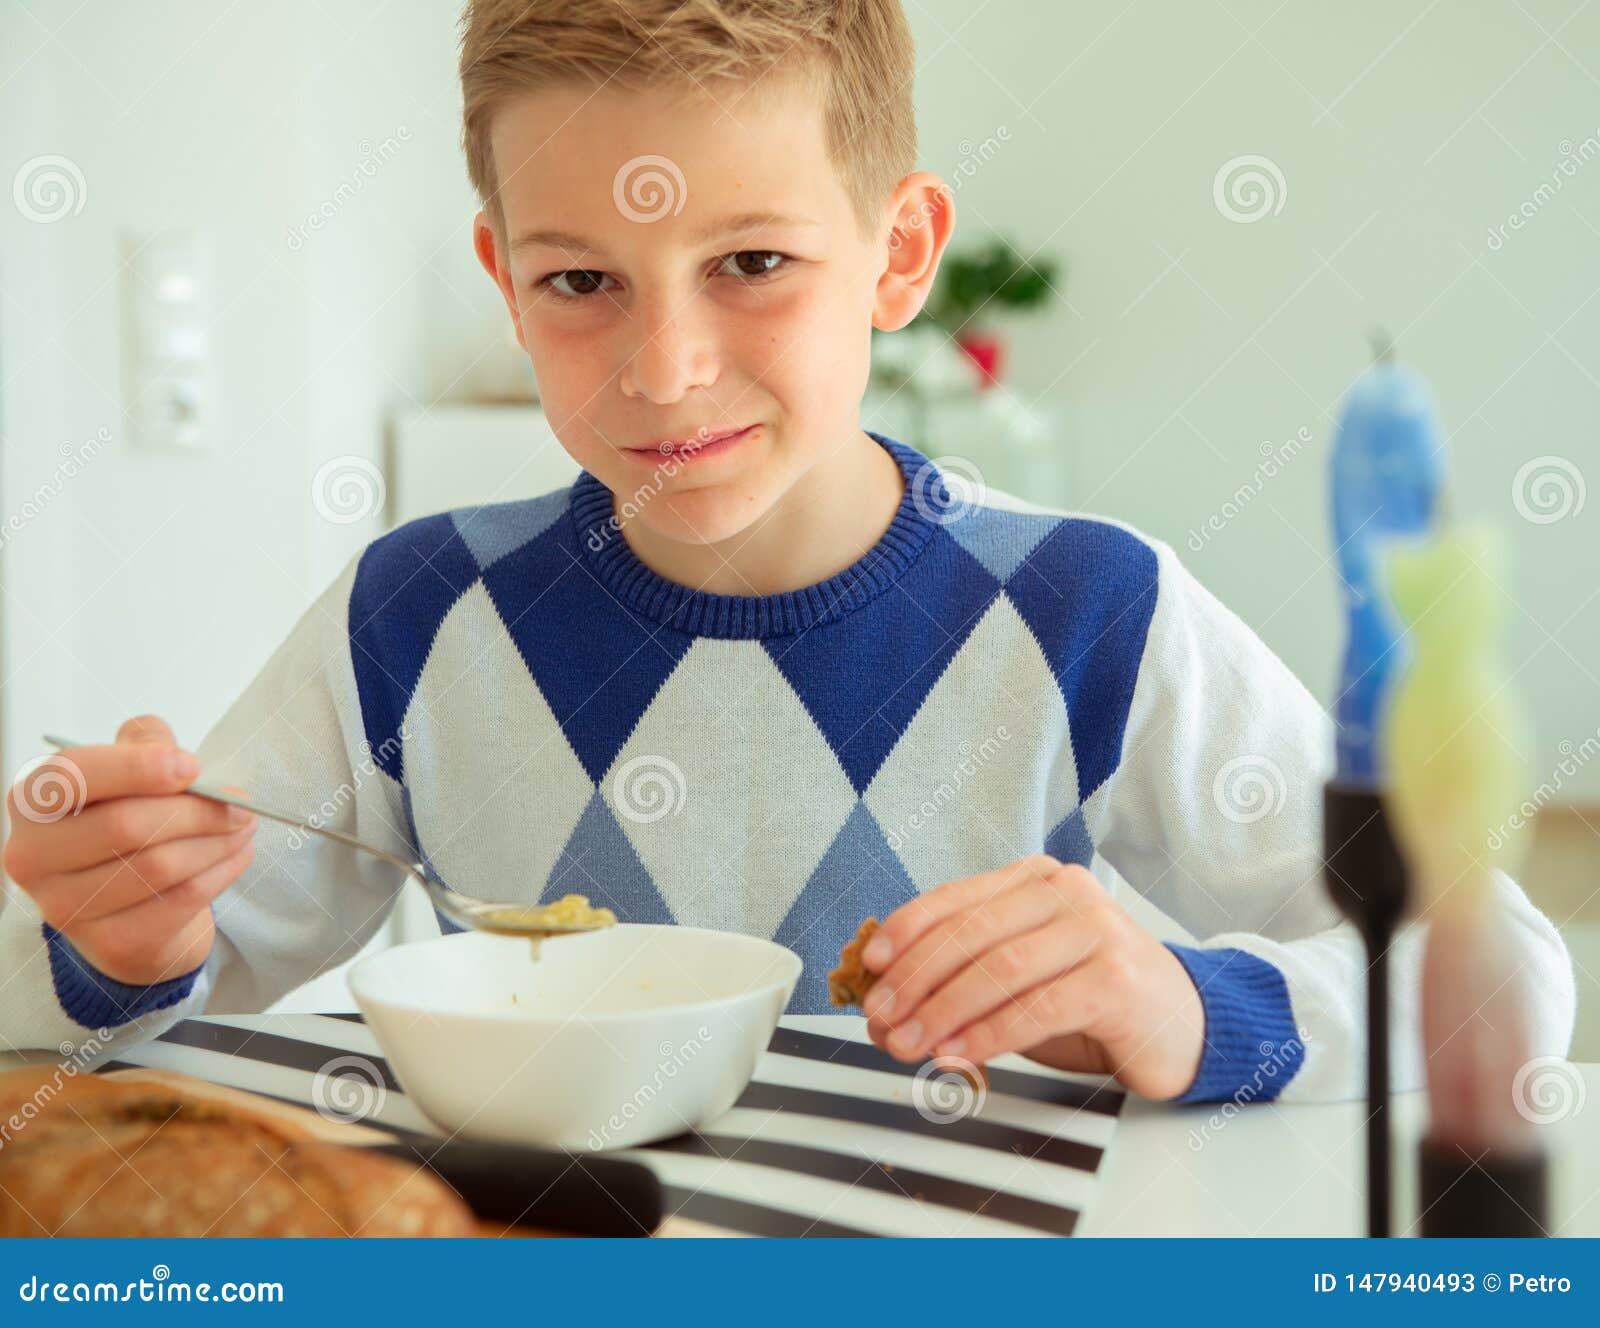 Handsome Teenager Eating Soup And Whole Grain Bread In Bright